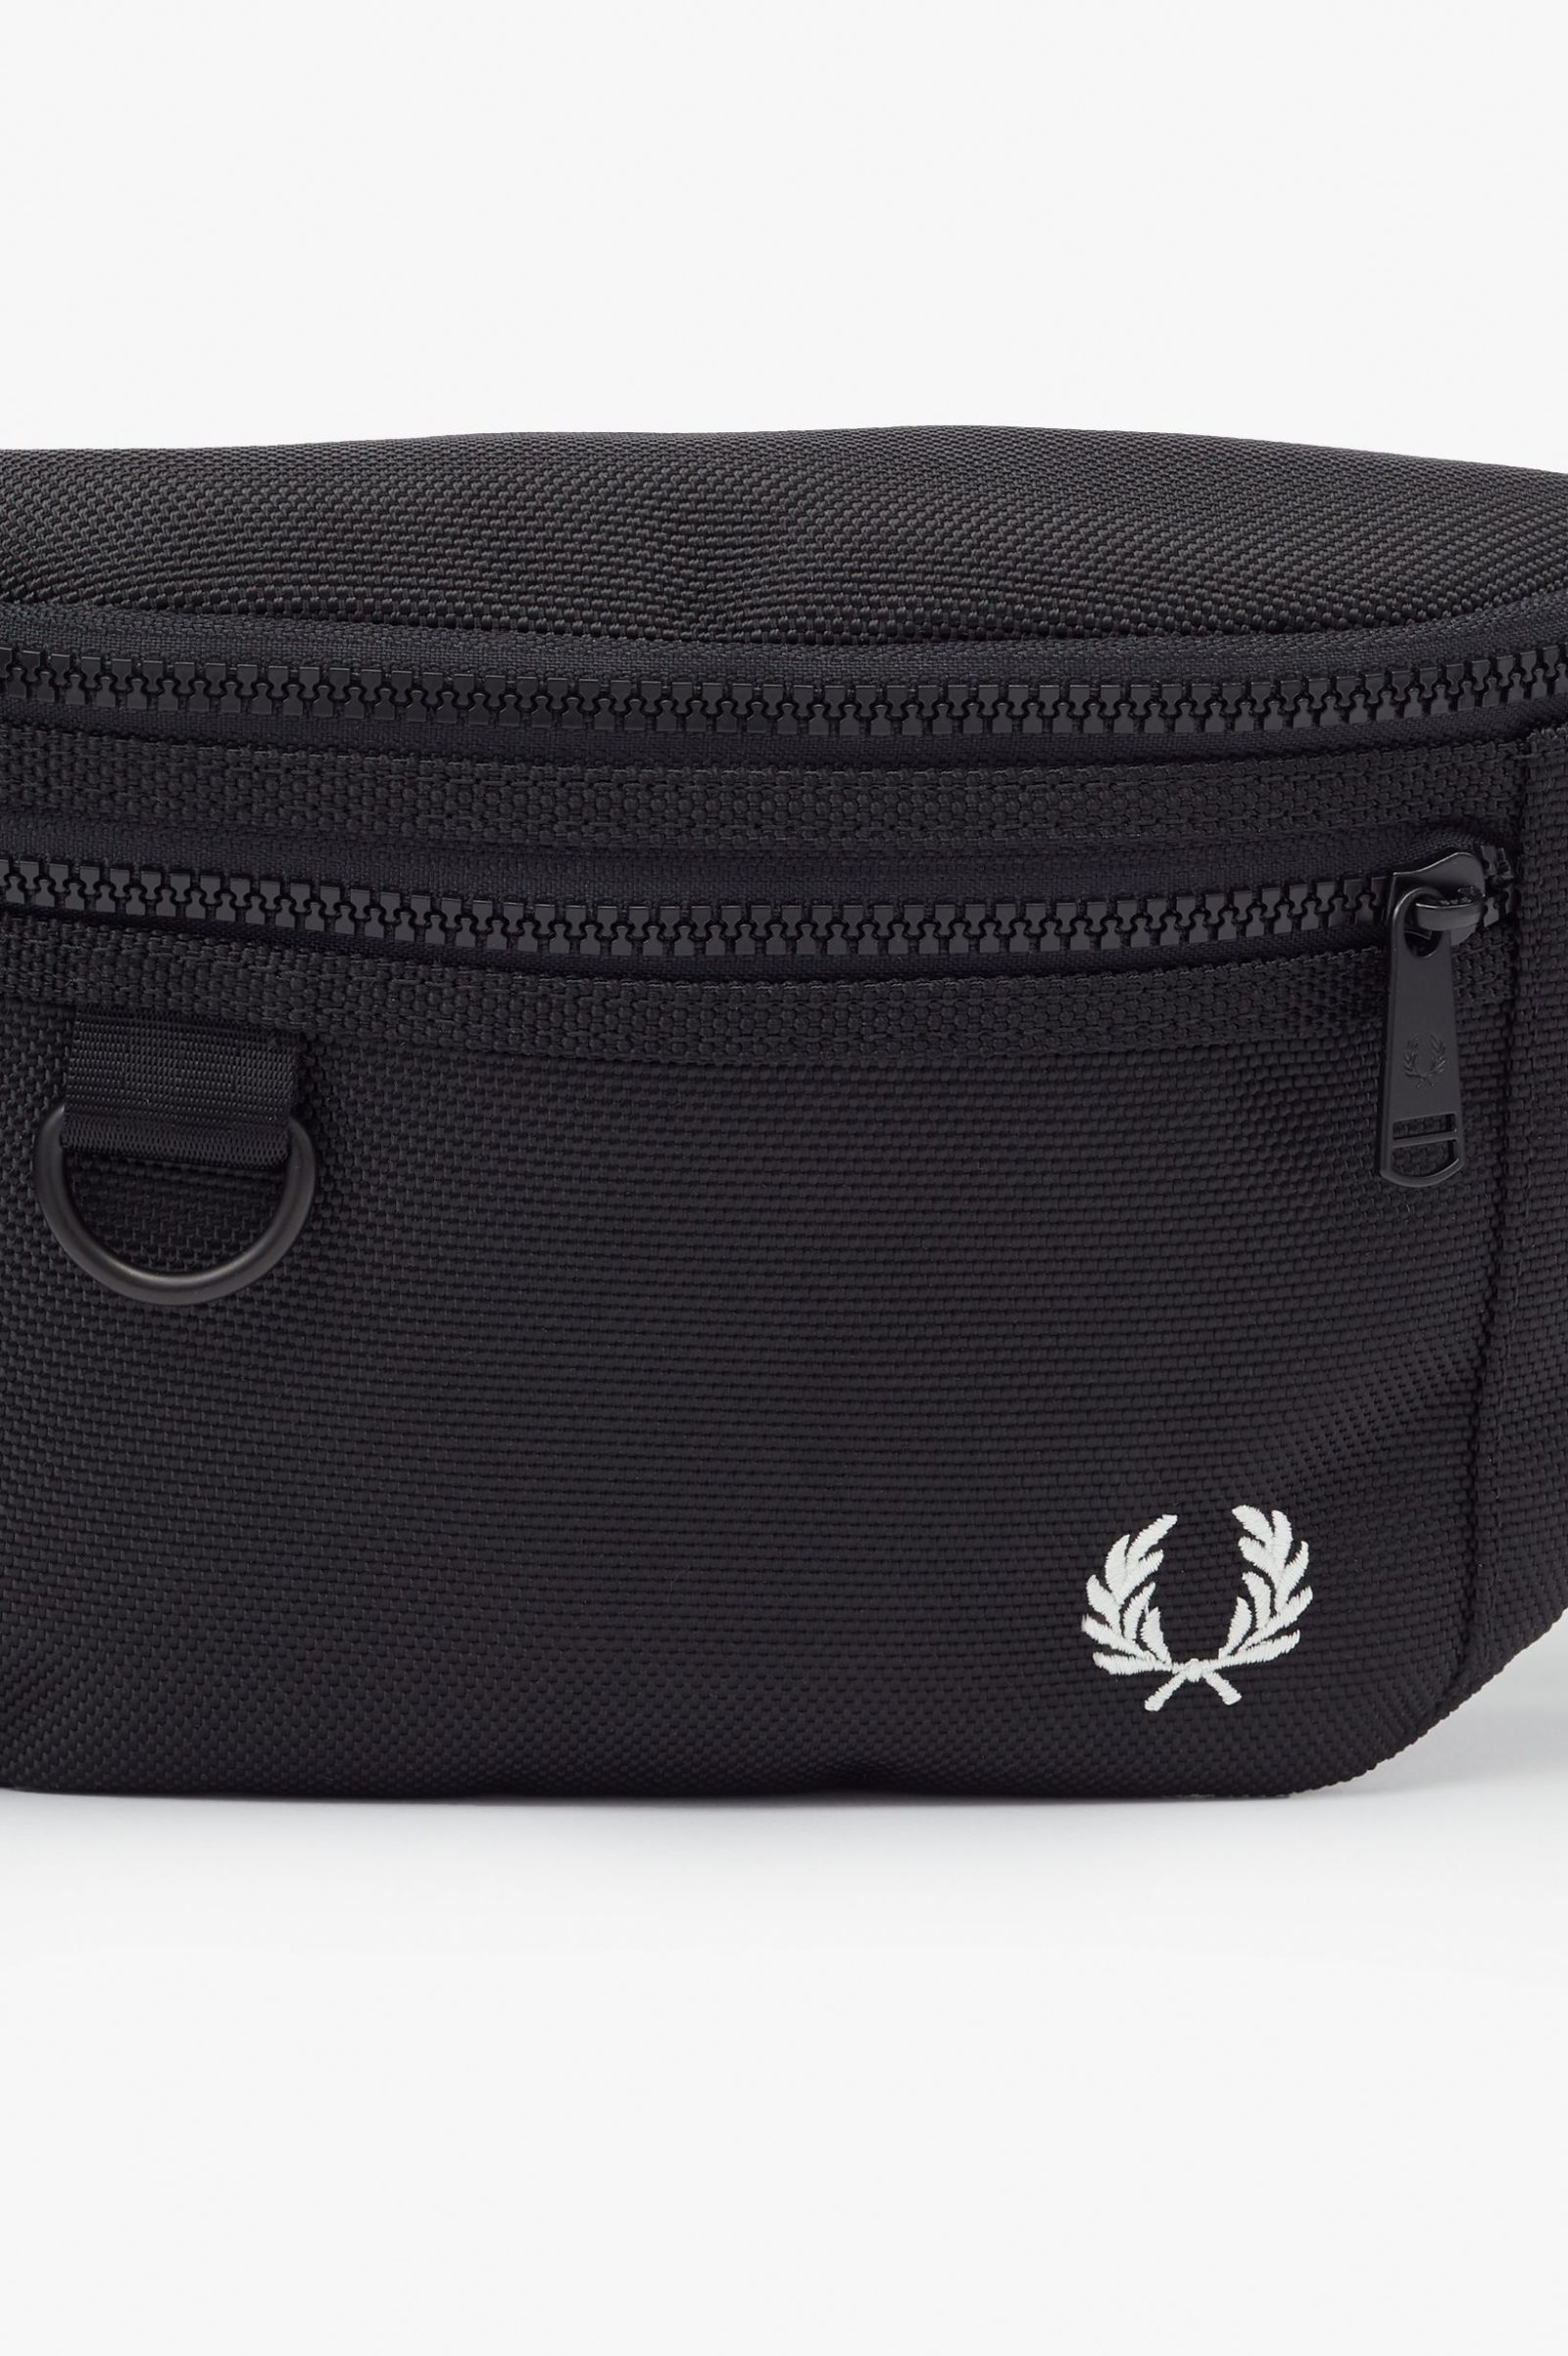 fred perry man bag